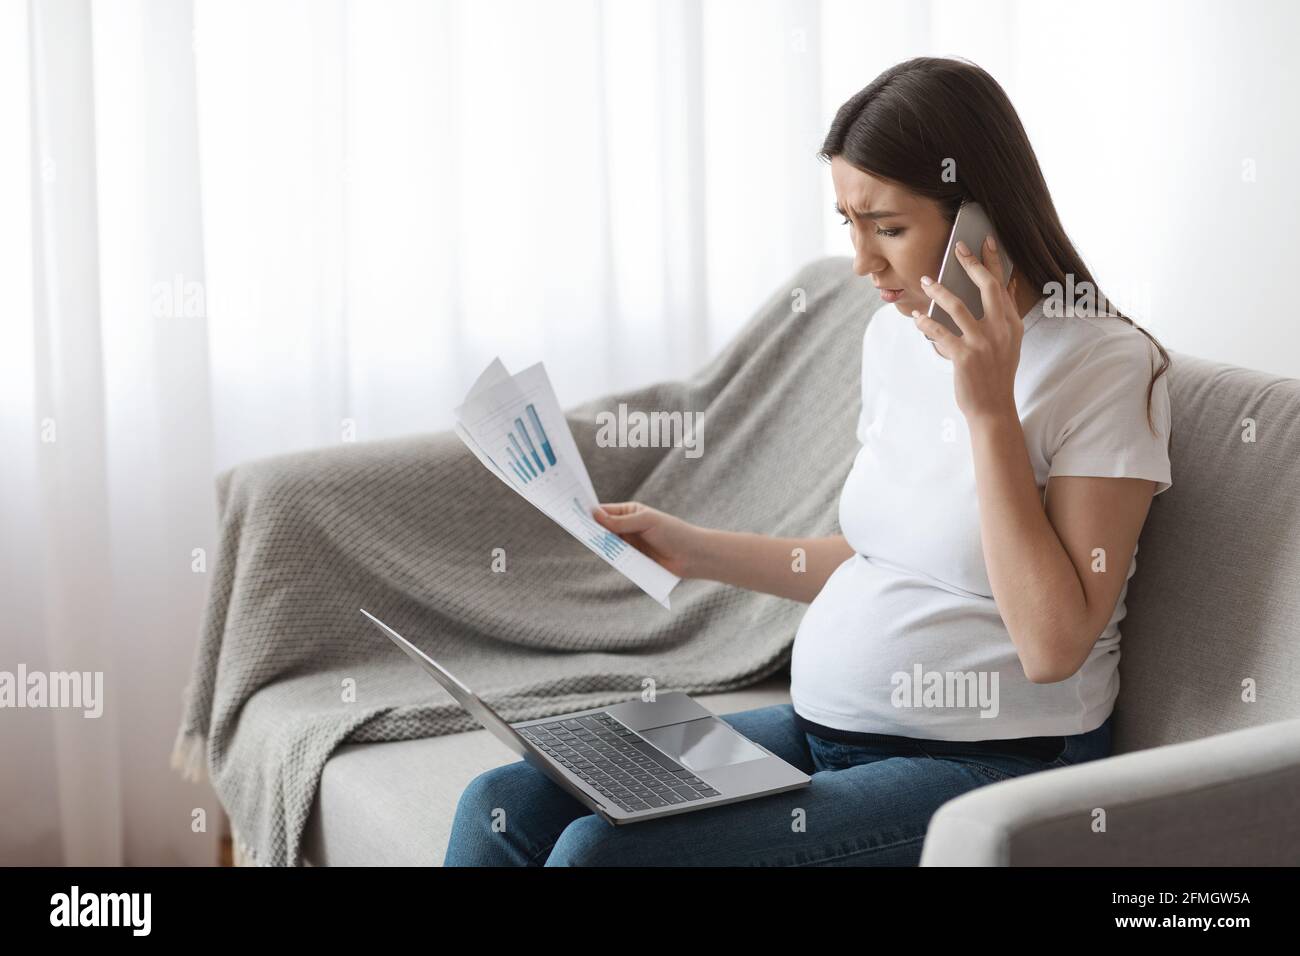 Remote Work During Pregnancy. Stressed Pregnant Woman Working With Papers And Laptop Stock Photo